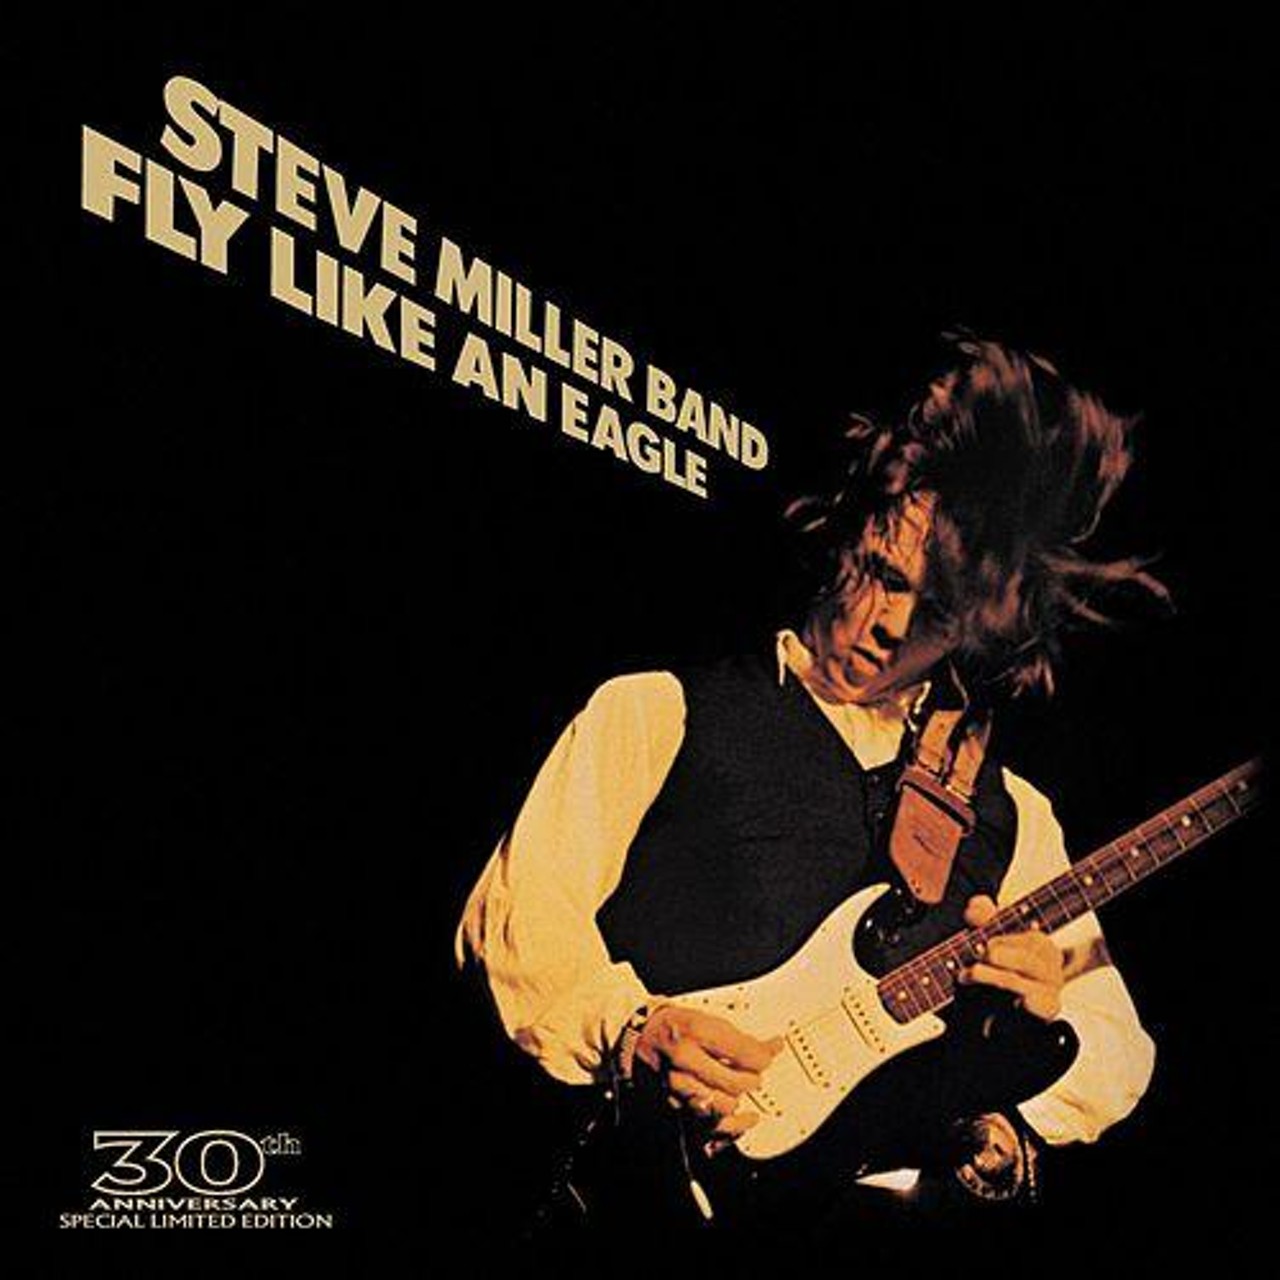 Probably Steve Miller's most recognized single, "Fly Like an Eagle" was released in 1976 and reached No. 10 on the U.S. Billboard Hot 100 chart. It climbed to No. 2 in Canada. The song is also a favorite for other acts to cover, including Vanilla Ice, The Neville Brothers, Yolanda Adams and others all either sampling or singing it in its entirety. It's also a favorite in product commercials.